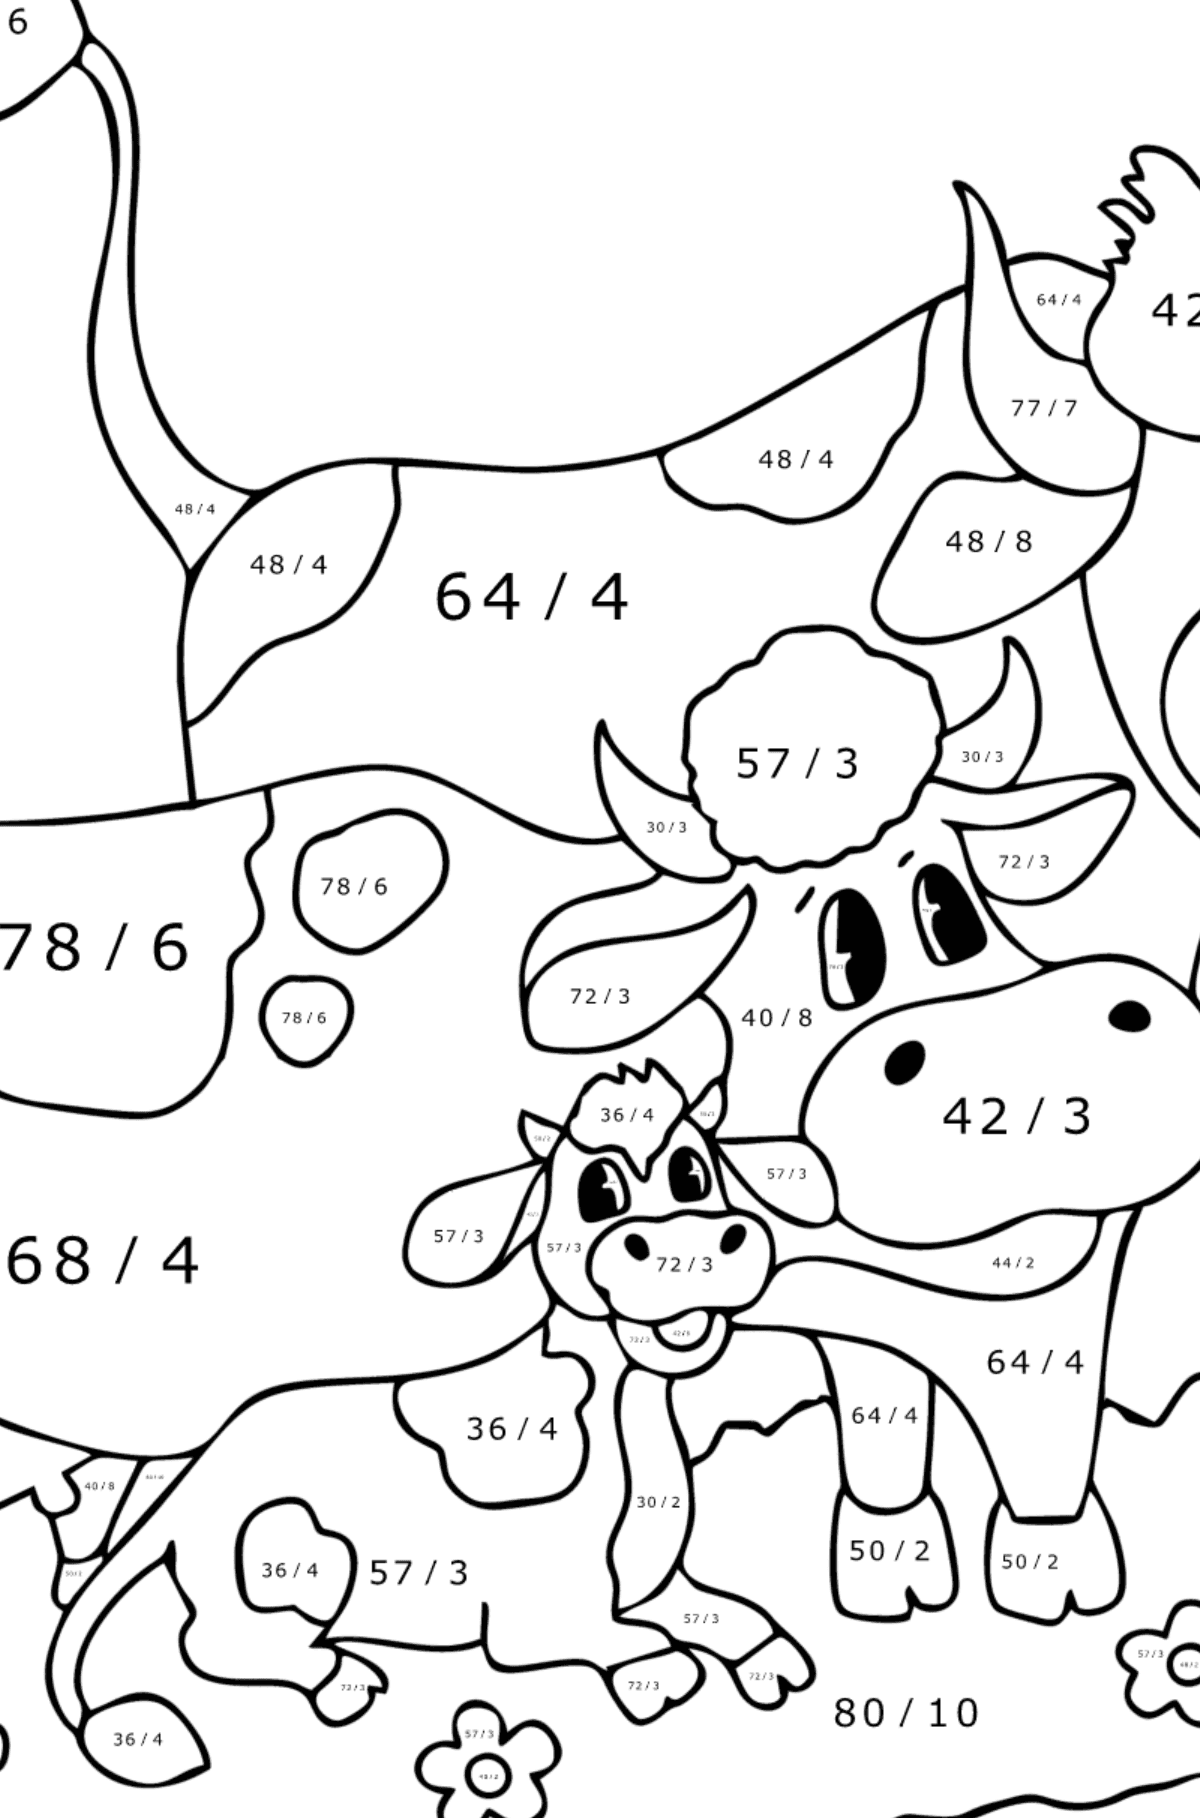 Cow, bull and calf coloring page - Math Coloring - Division for Kids